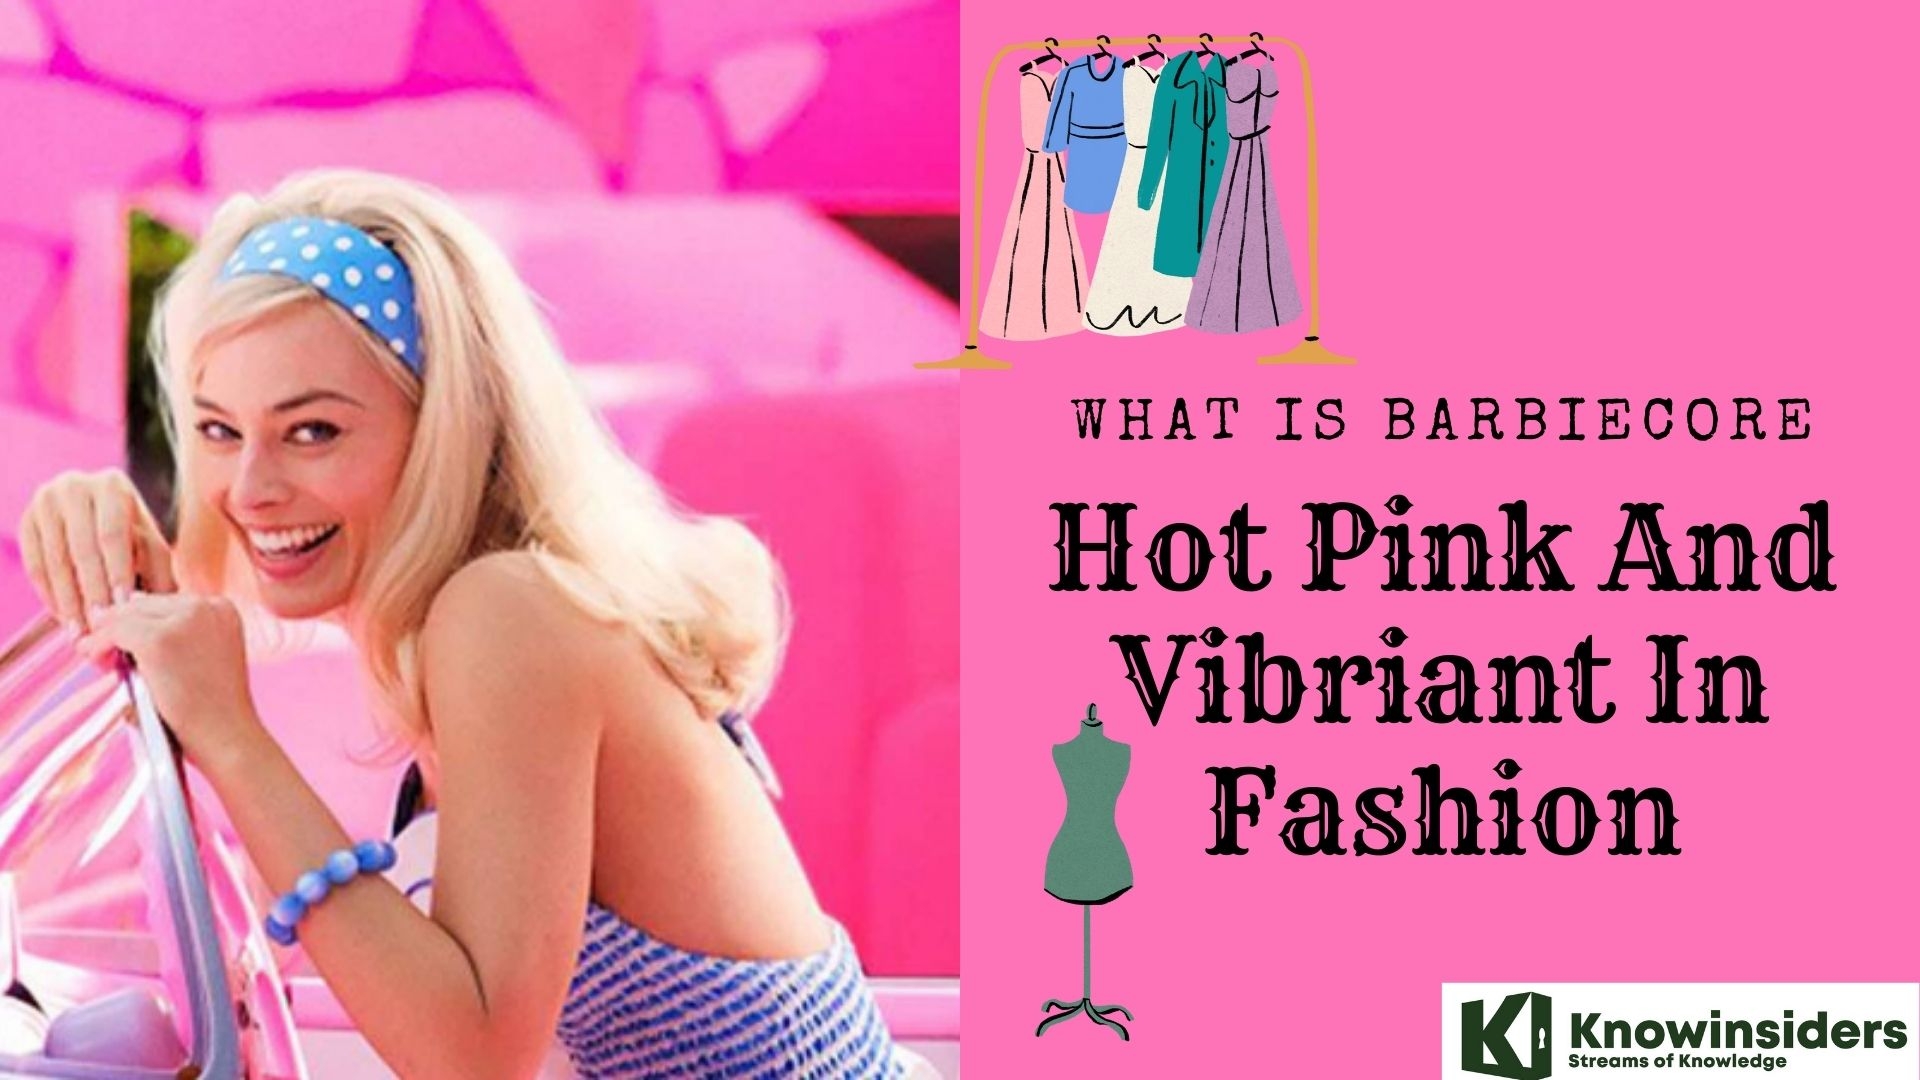 What Is “Barbiecore”: Hot Pink And Vibriant In Fashion